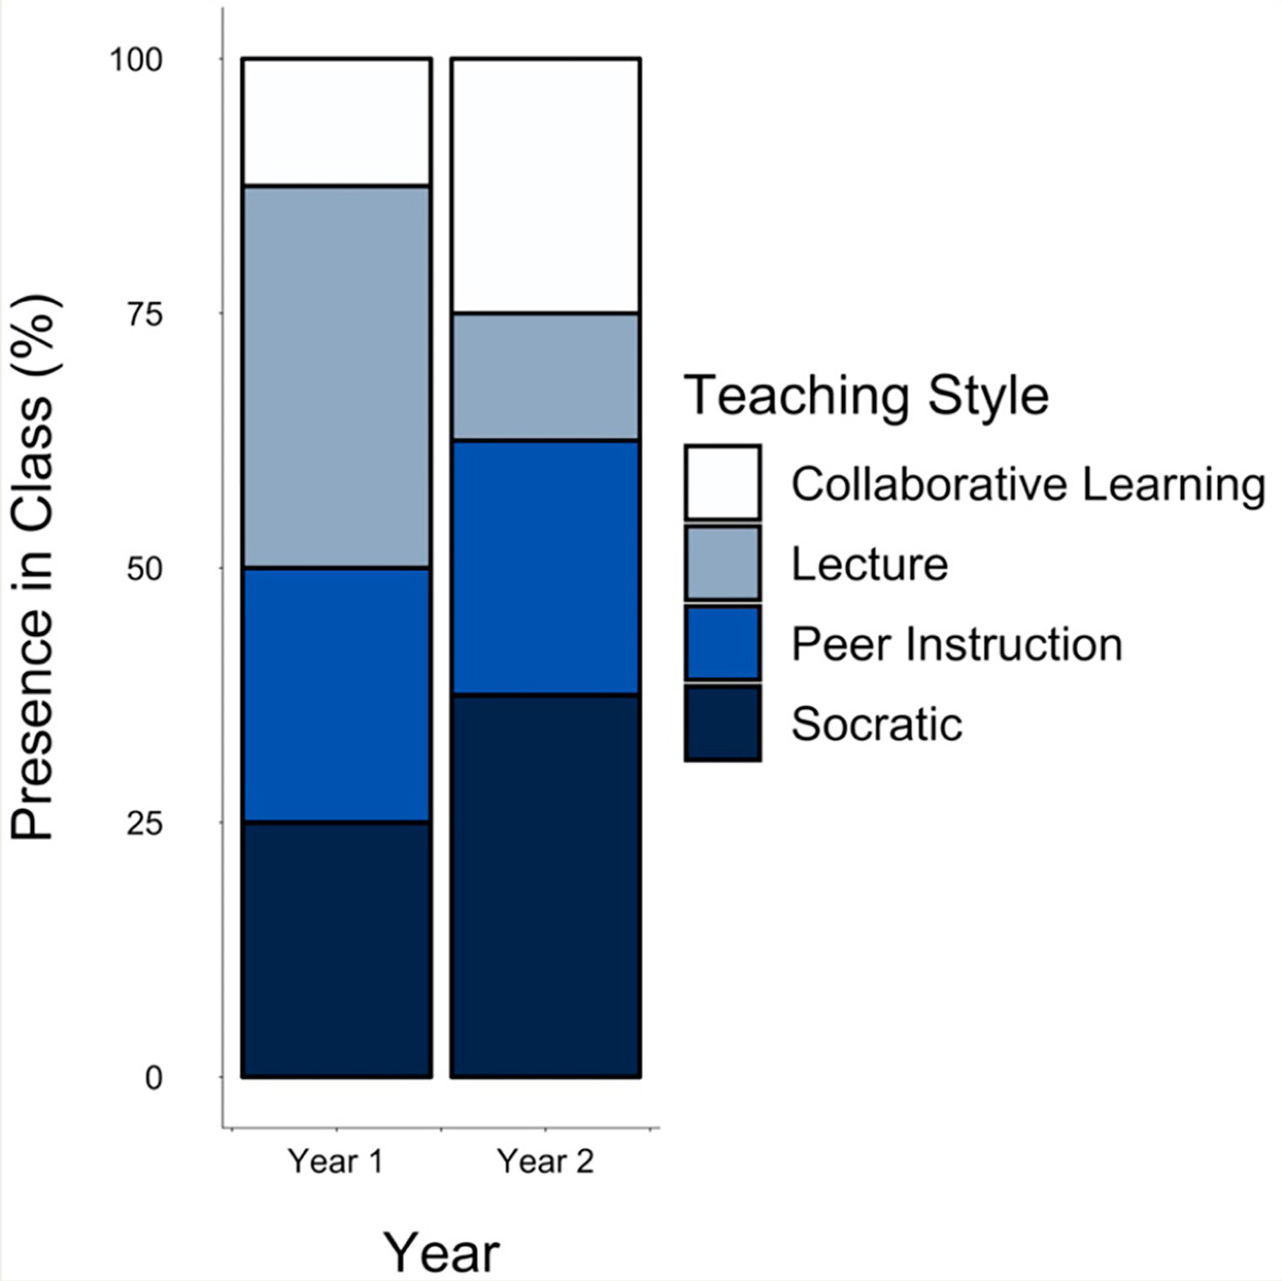 Figure 1 Presence (%) of each teaching style in Year 1 and Year 2.